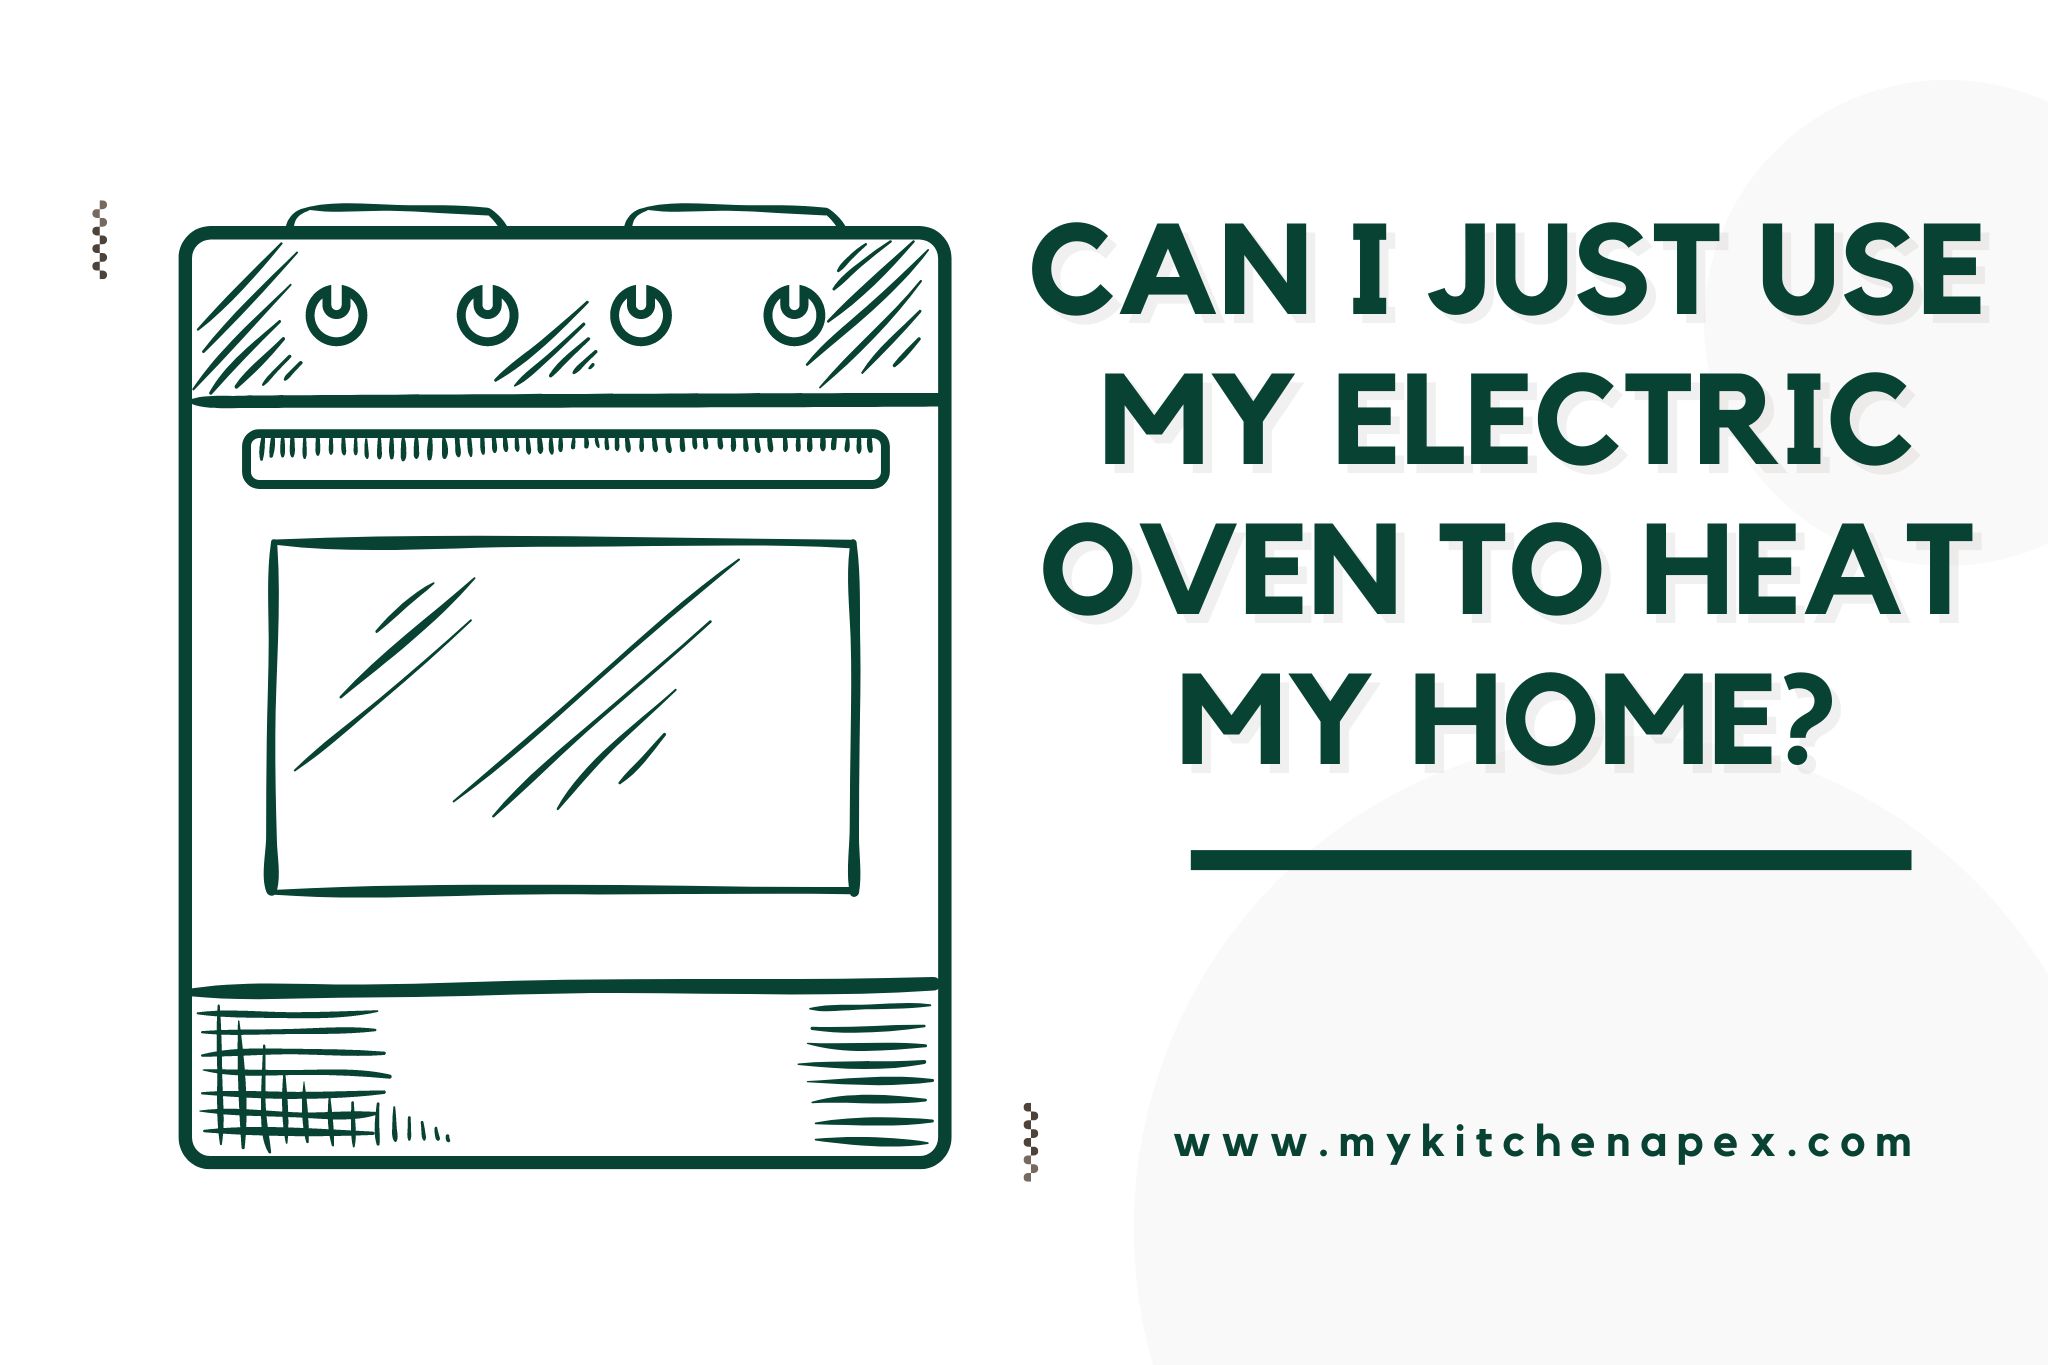 Can I just use my electric oven to heat my home?